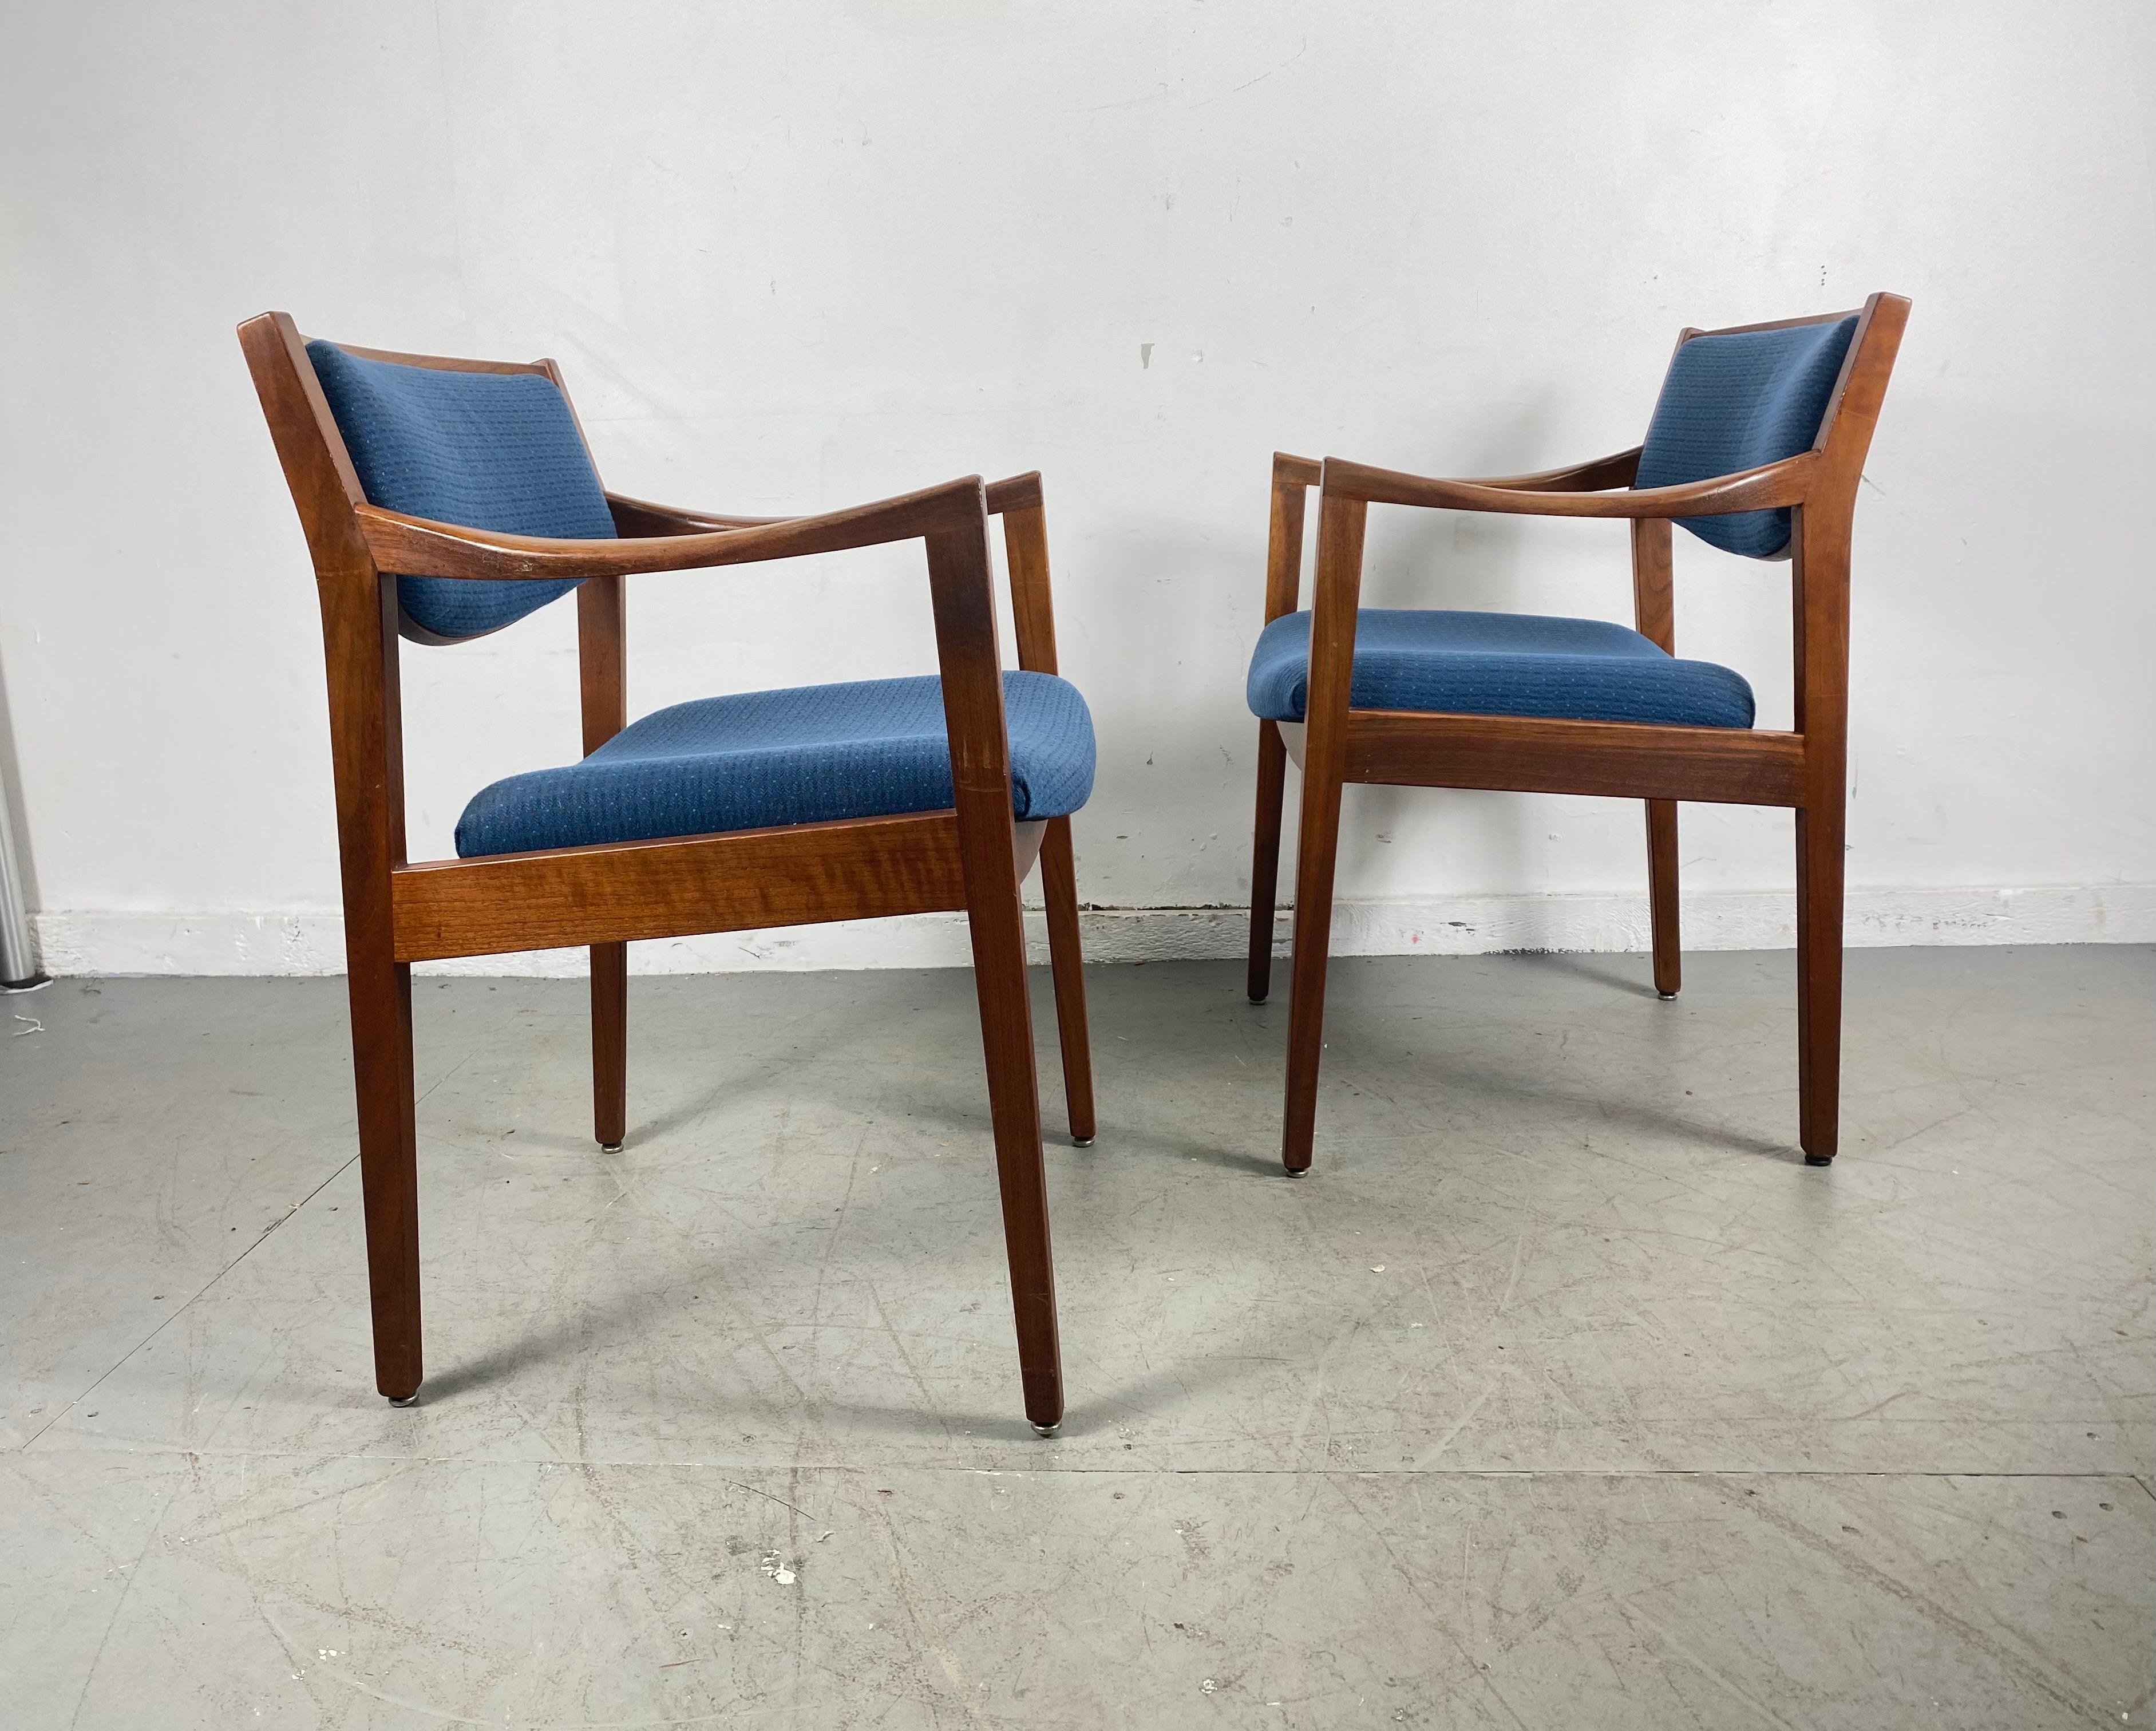 Pair of Gunlocke modernist sculpted walnut and fabric occasional armchairs, in the style of Jens Risom, Classic Mid-Century Modern design, extremely comfortable, reupholstered (at some point) in a blue wool fabric.